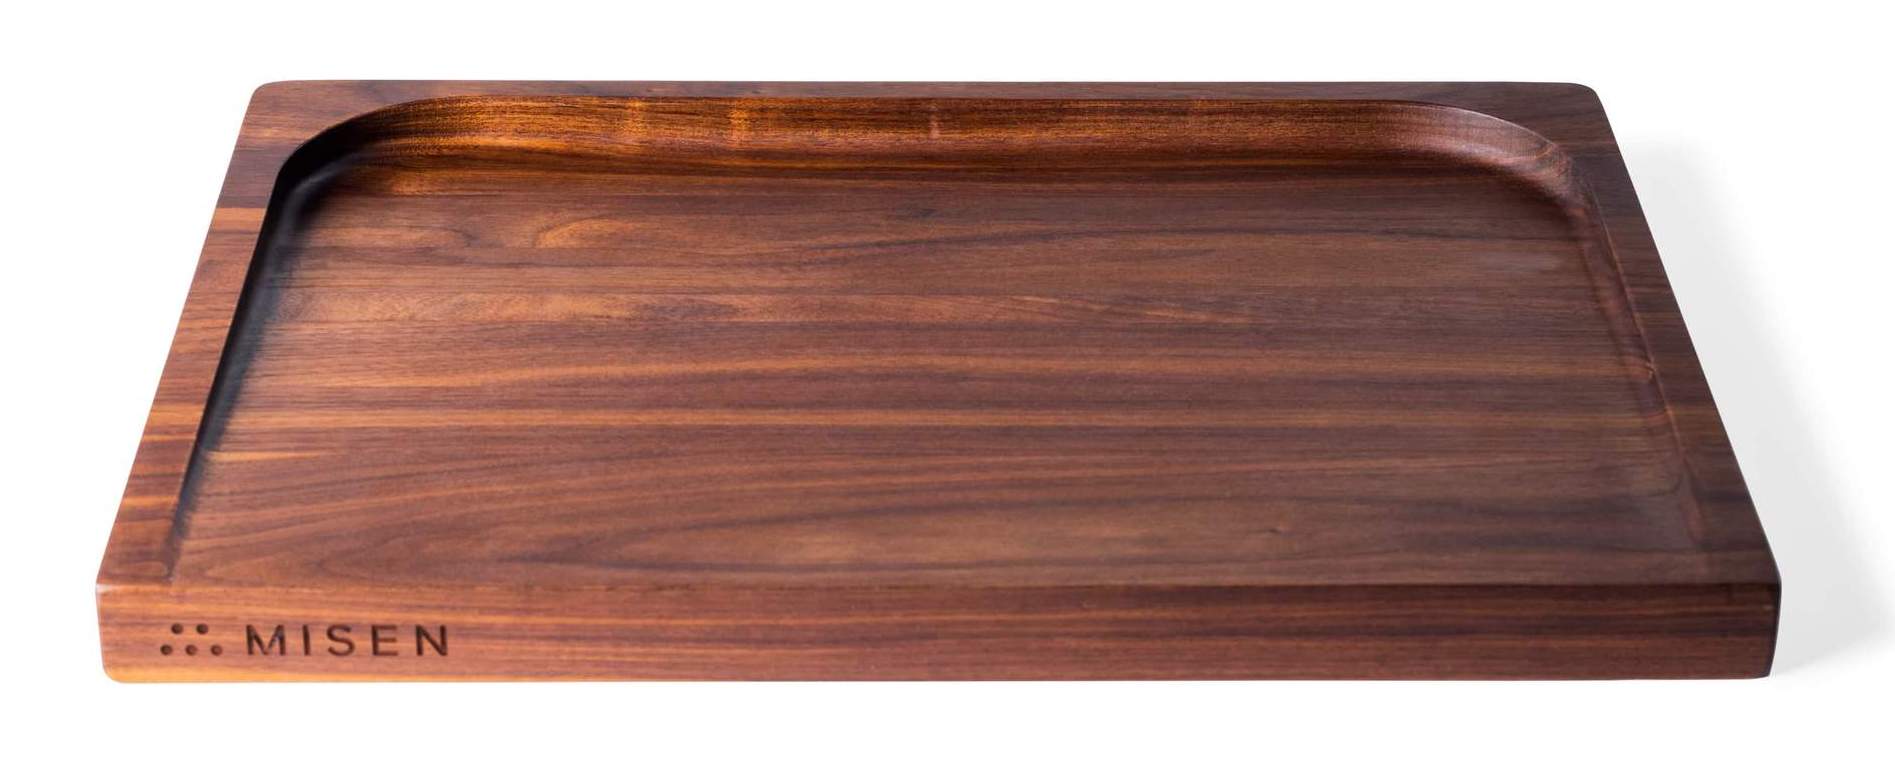 How to clean a wooden a cutting board: the Misen Trenched Cutting Board in Black Walnut